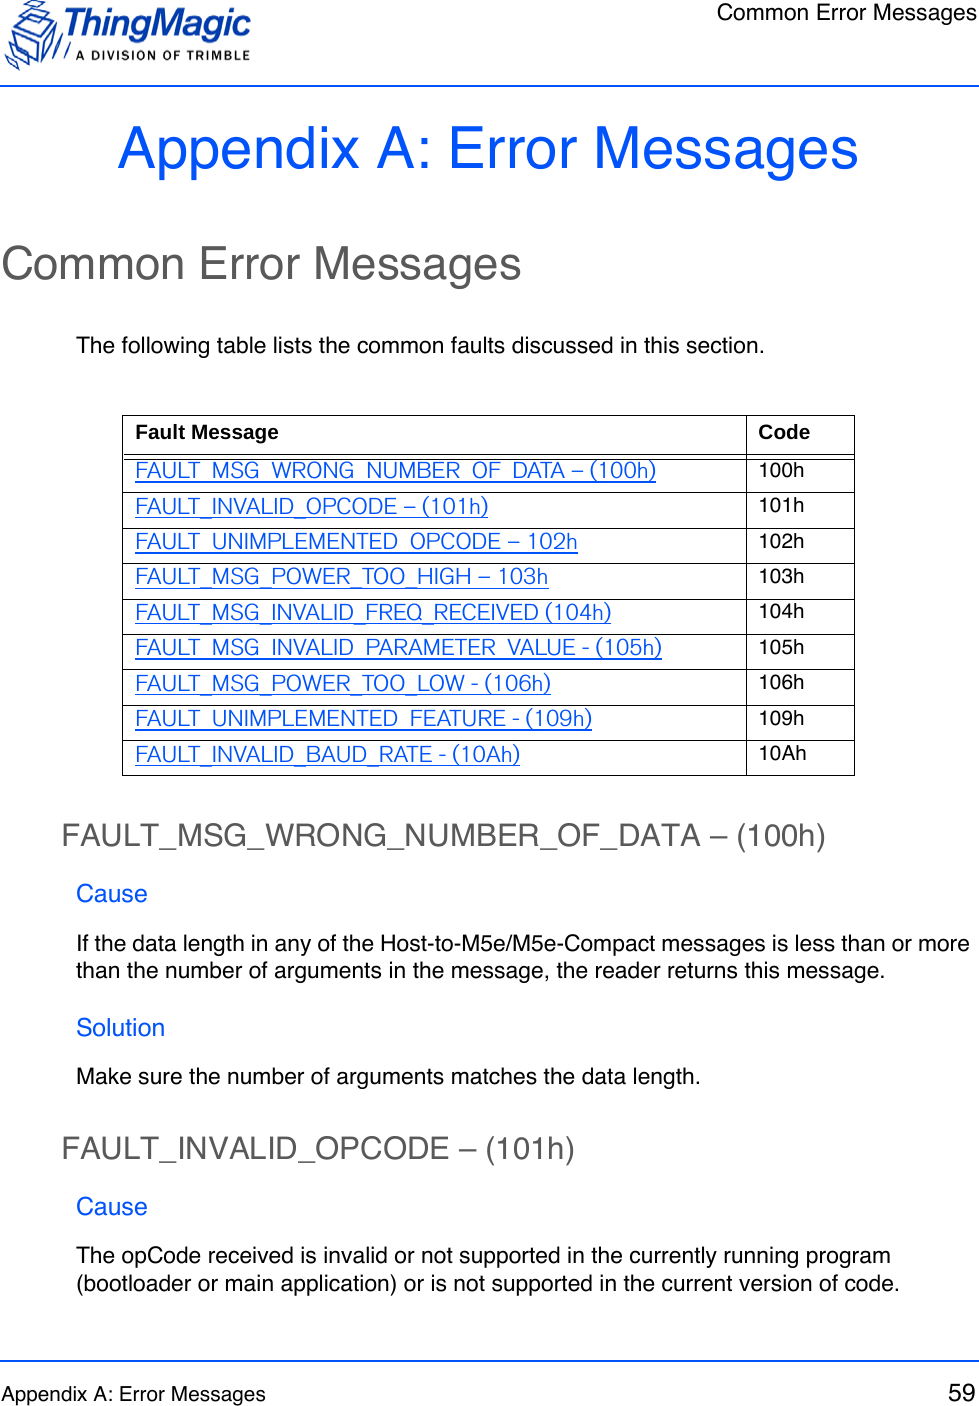 Common Error MessagesAppendix A: Error Messages 59Appendix A: Error MessagesCommon Error MessagesThe following table lists the common faults discussed in this section.FAULT_MSG_WRONG_NUMBER_OF_DATA – (100h)CauseIf the data length in any of the Host-to-M5e/M5e-Compact messages is less than or more than the number of arguments in the message, the reader returns this message.SolutionMake sure the number of arguments matches the data length.FAULT_INVALID_OPCODE – (101h)CauseThe opCode received is invalid or not supported in the currently running program (bootloader or main application) or is not supported in the current version of code.Fault Message CodeFAULT_MSG_WRONG_NUMBER_OF_DATA – (100h) 100hFAULT_INVALID_OPCODE – (101h) 101hFAULT_UNIMPLEMENTED_OPCODE – 102h 102hFAULT_MSG_POWER_TOO_HIGH – 103h 103hFAULT_MSG_INVALID_FREQ_RECEIVED (104h) 104hFAULT_MSG_INVALID_PARAMETER_VALUE - (105h) 105hFAULT_MSG_POWER_TOO_LOW - (106h) 106hFAULT_UNIMPLEMENTED_FEATURE - (109h) 109hFAULT_INVALID_BAUD_RATE - (10Ah) 10Ah